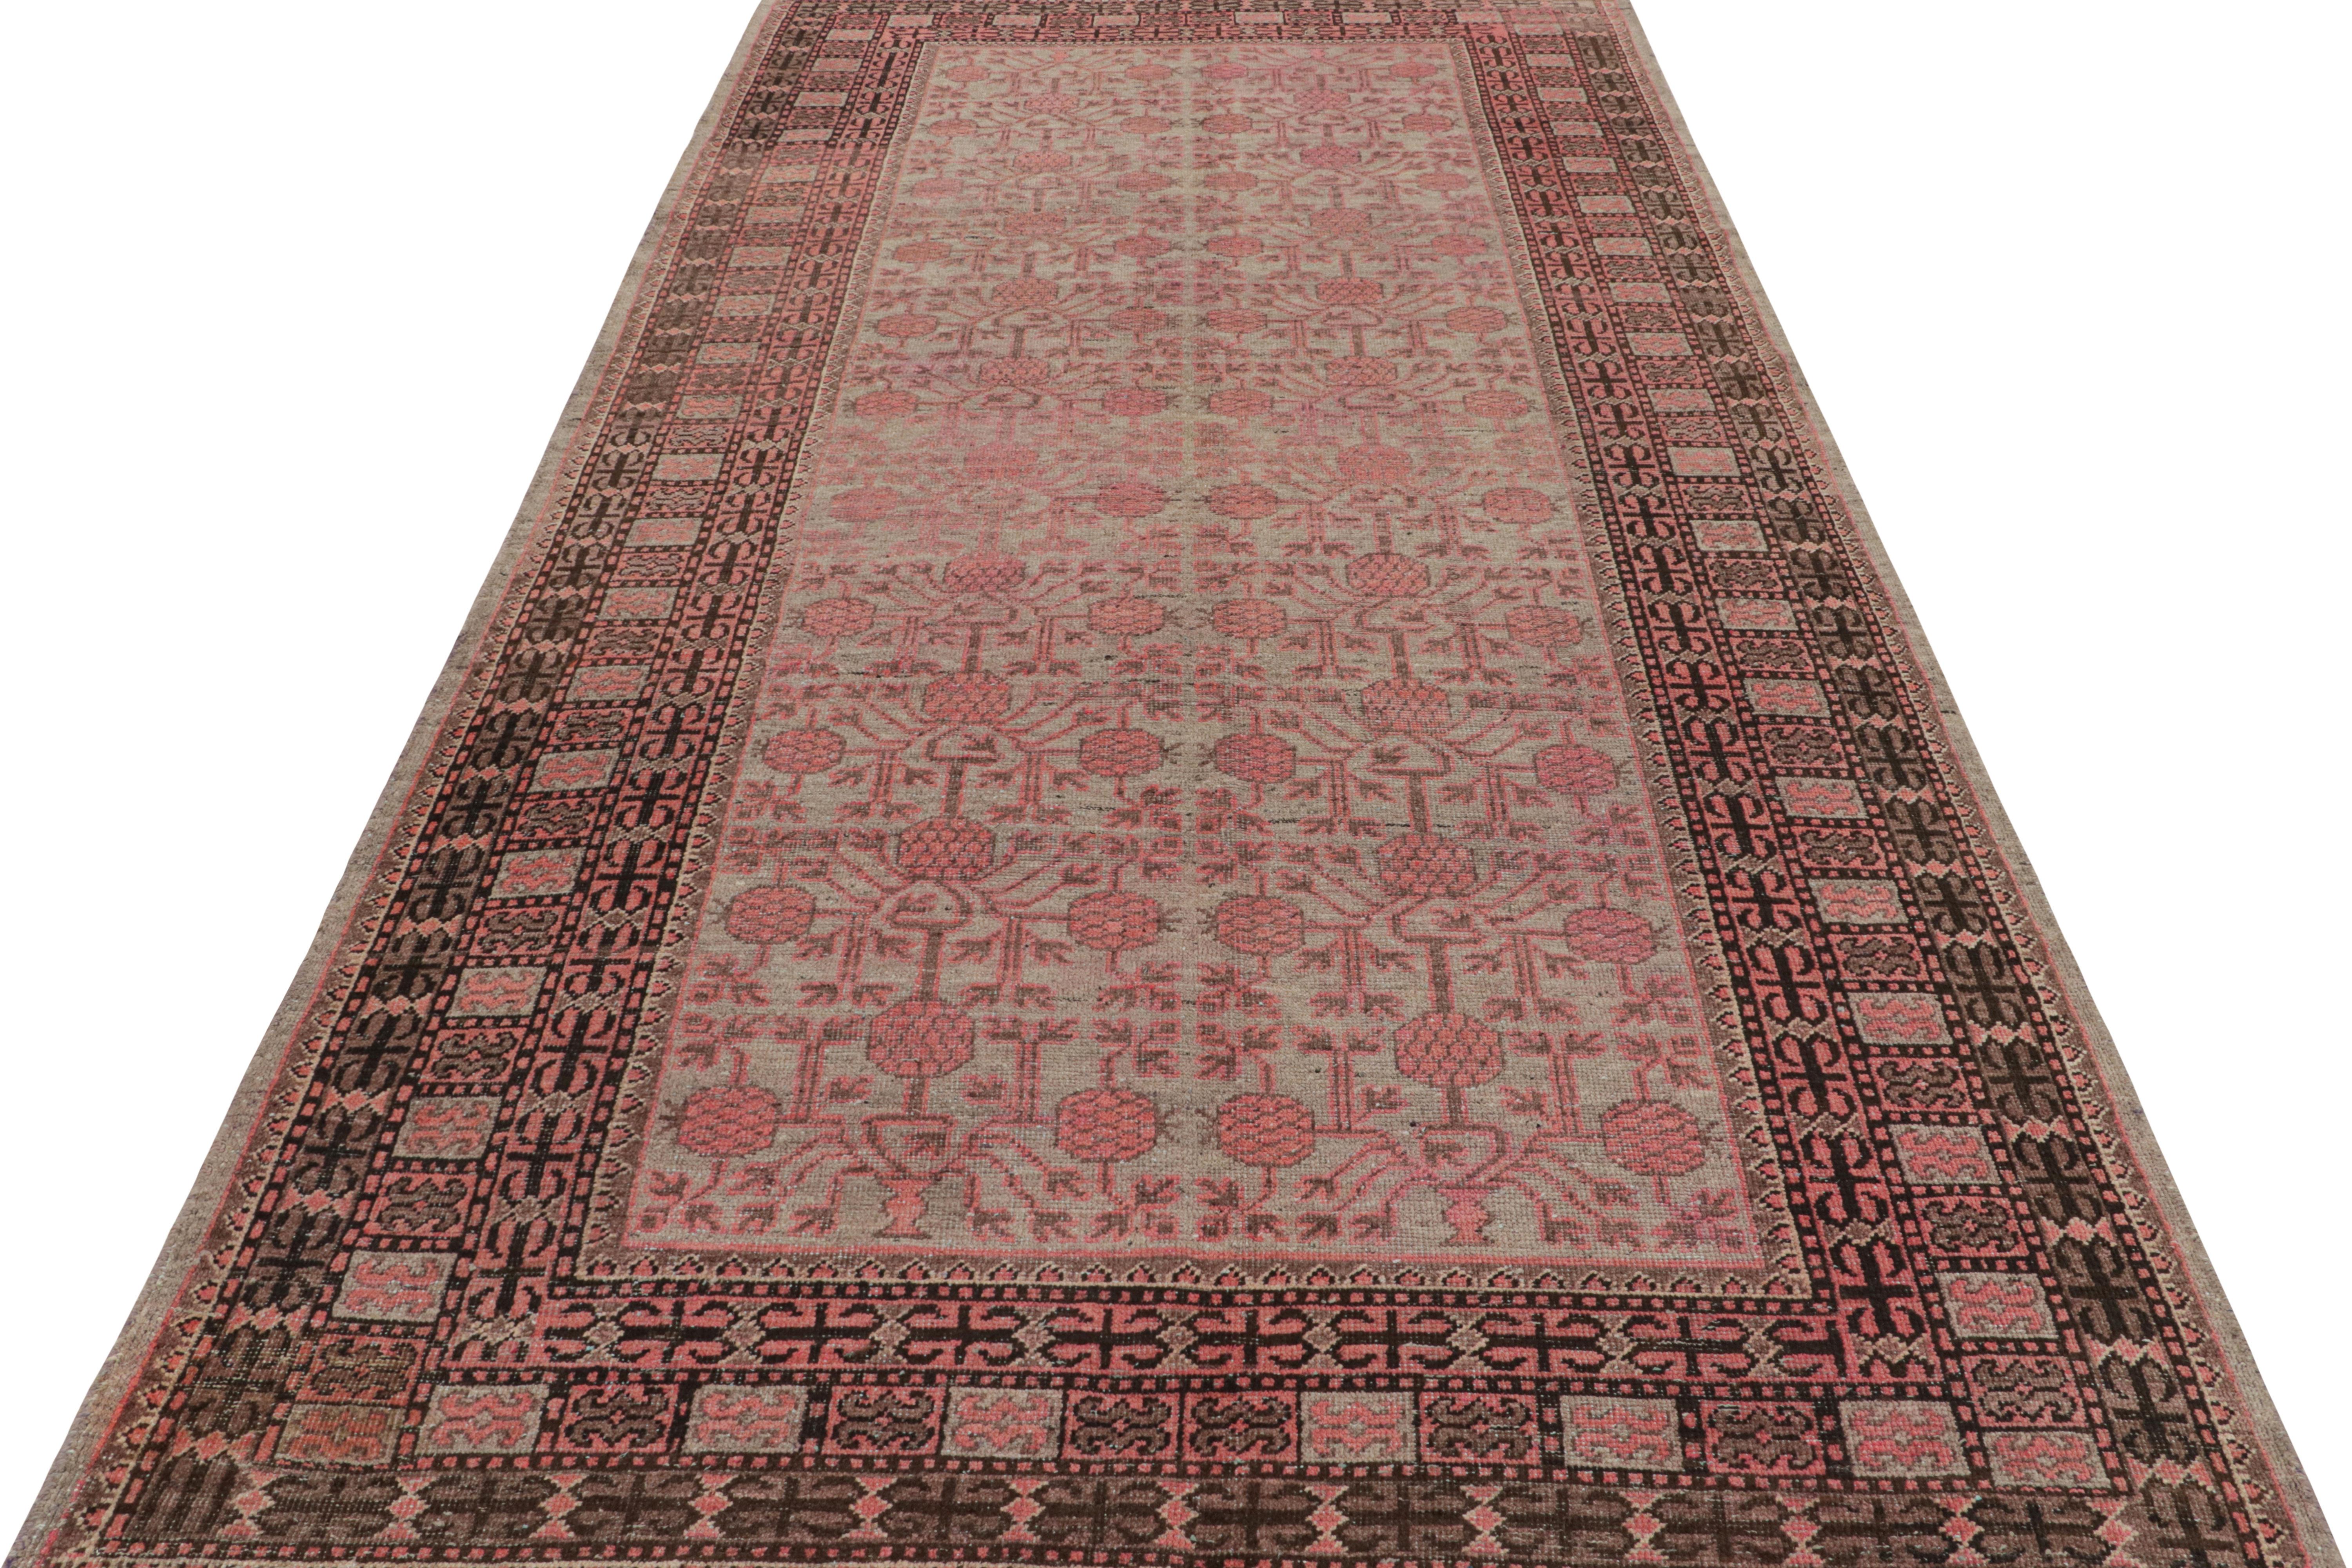 Indian Rug & Kilim's New Samarkand Style Wool Inspired Red and Blue Geometric Pattern For Sale